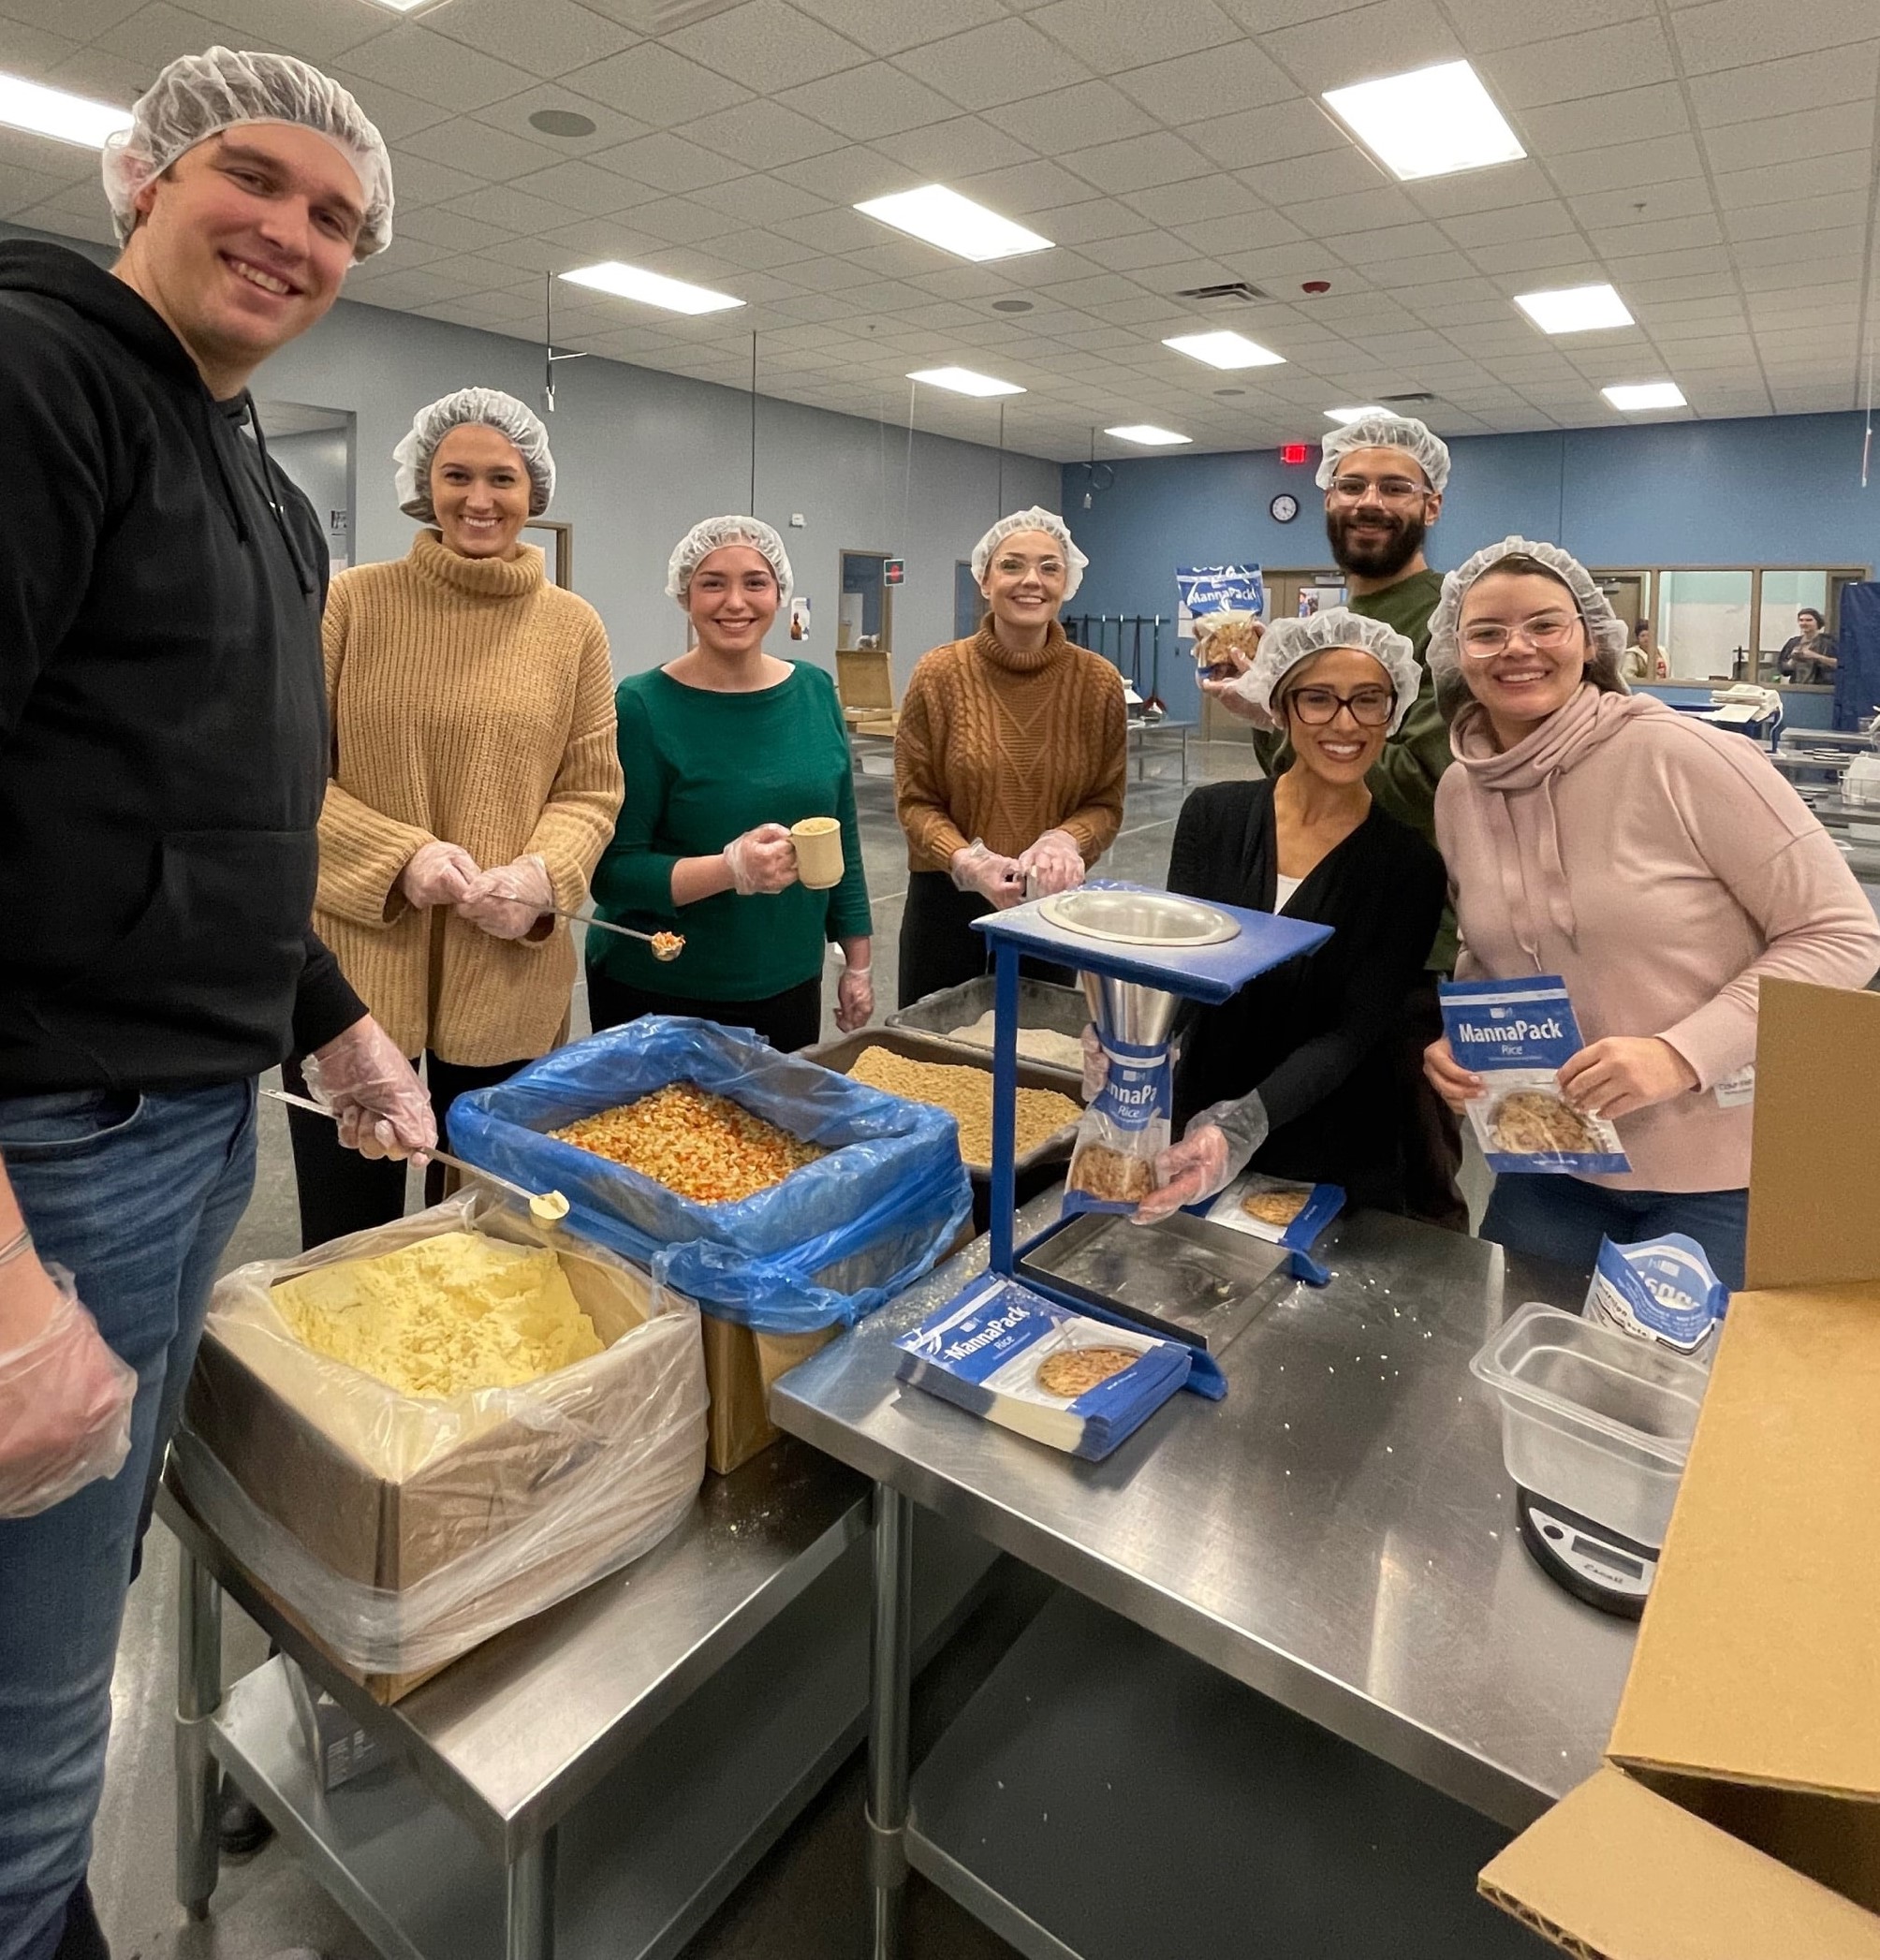 The Bectran team volunteered at Feed My Starving Children recently.